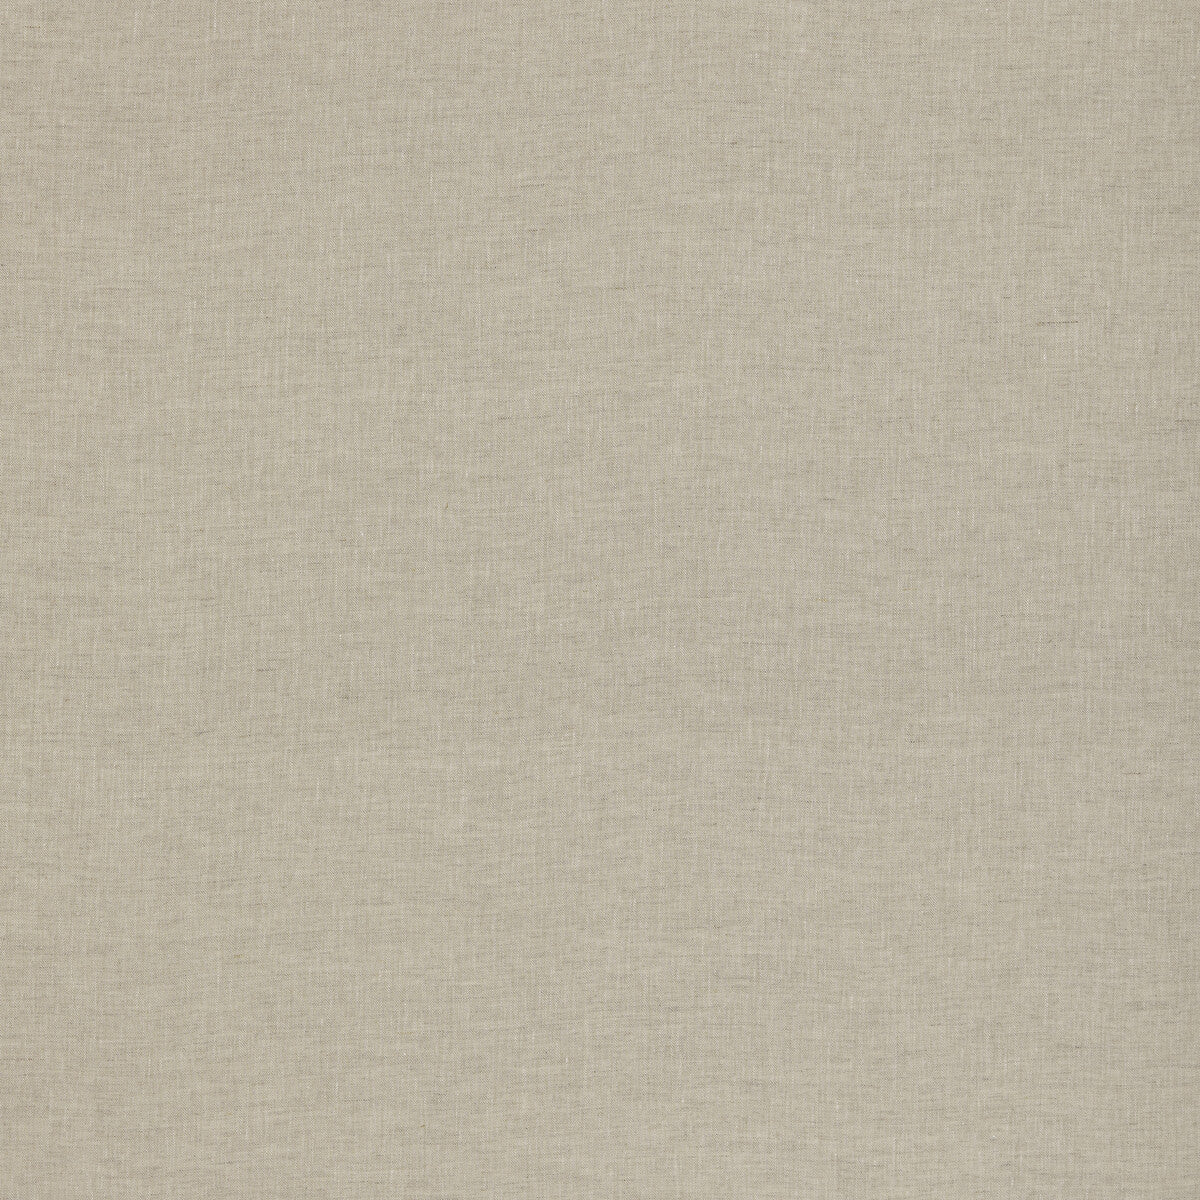 Flint fabric in parchment color - pattern ED85385.225.0 - by Threads in the Quintessential Naturals collection